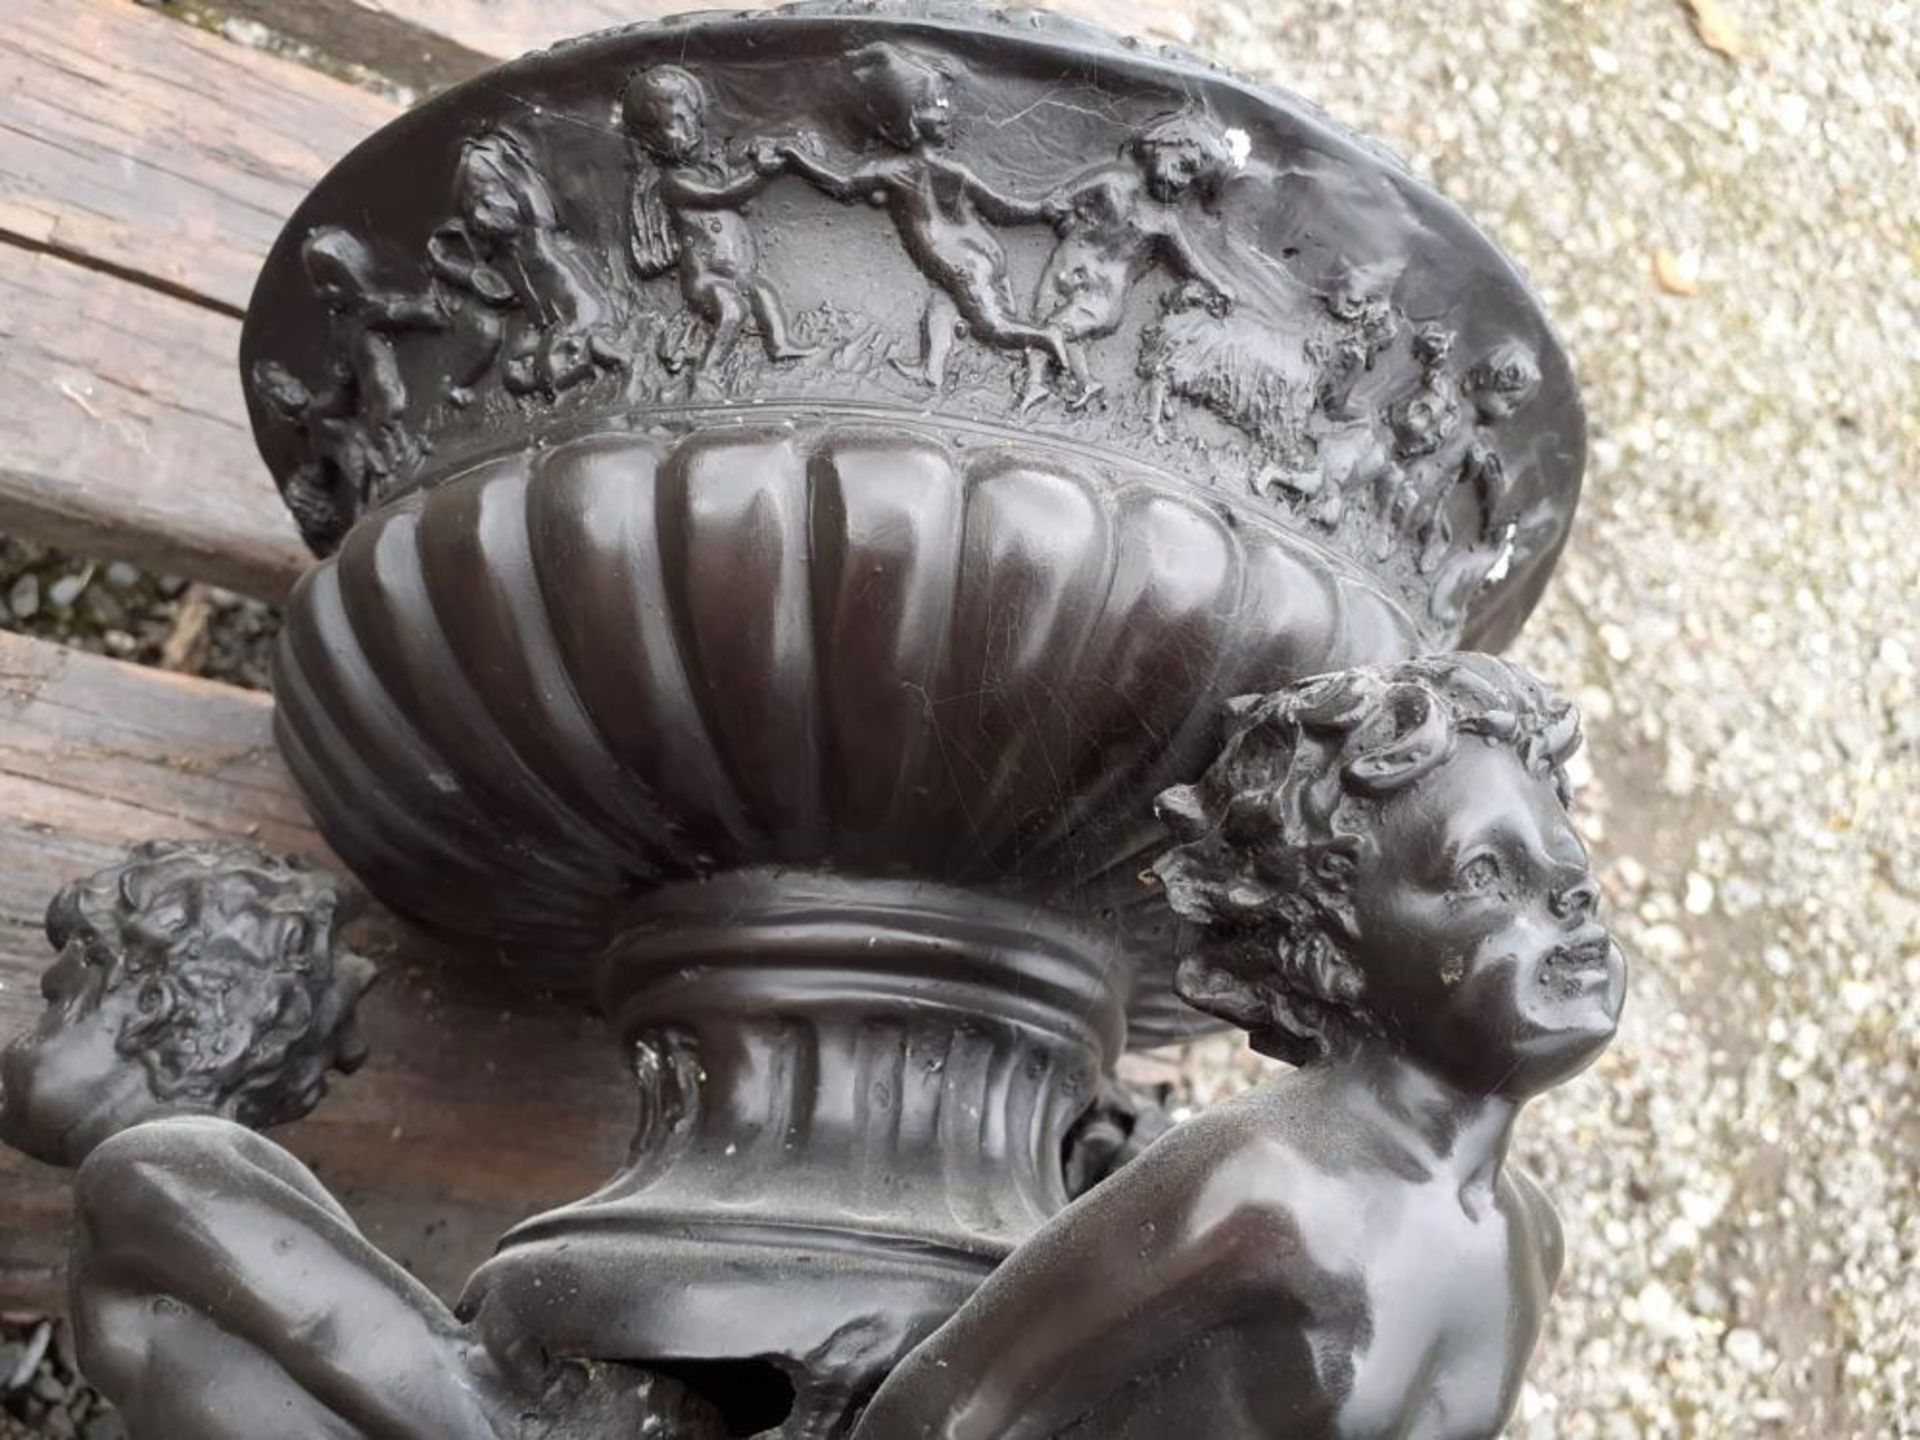 1 x Large Table Statue / Sculpture Of 3 Cherubs Carrying A Planter In Black Metal With Marble / Gran - Image 4 of 10